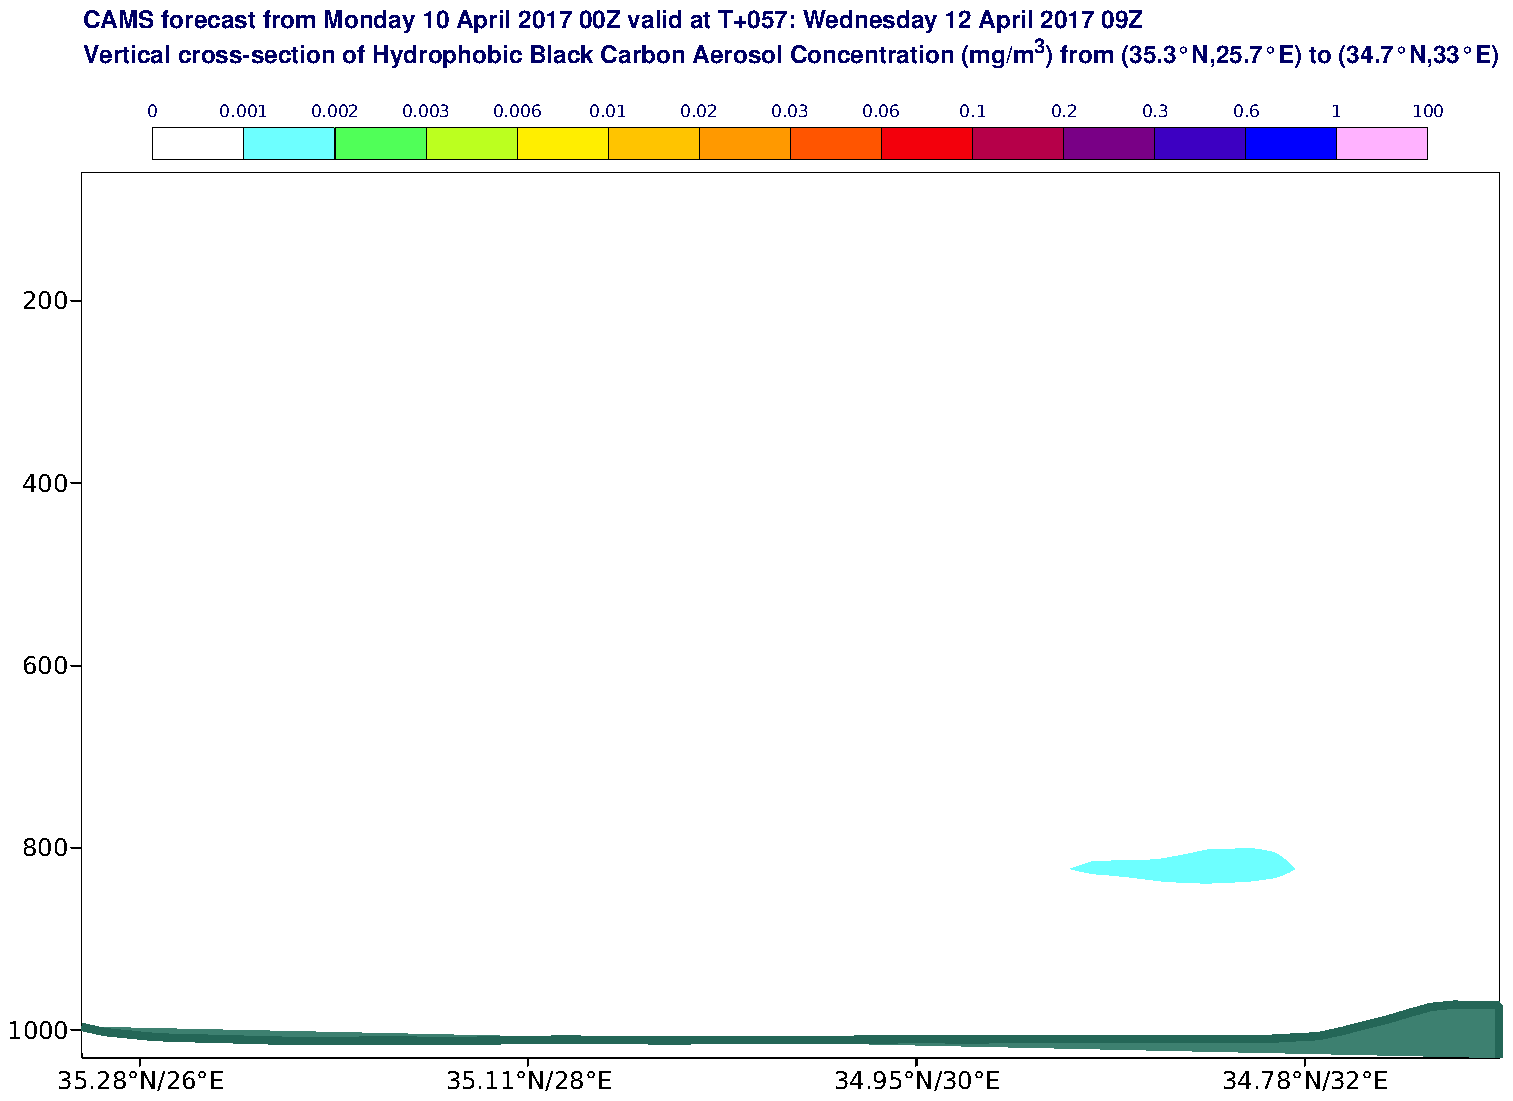 Vertical cross-section of Hydrophobic Black Carbon Aerosol Concentration (mg/m3) valid at T57 - 2017-04-12 09:00